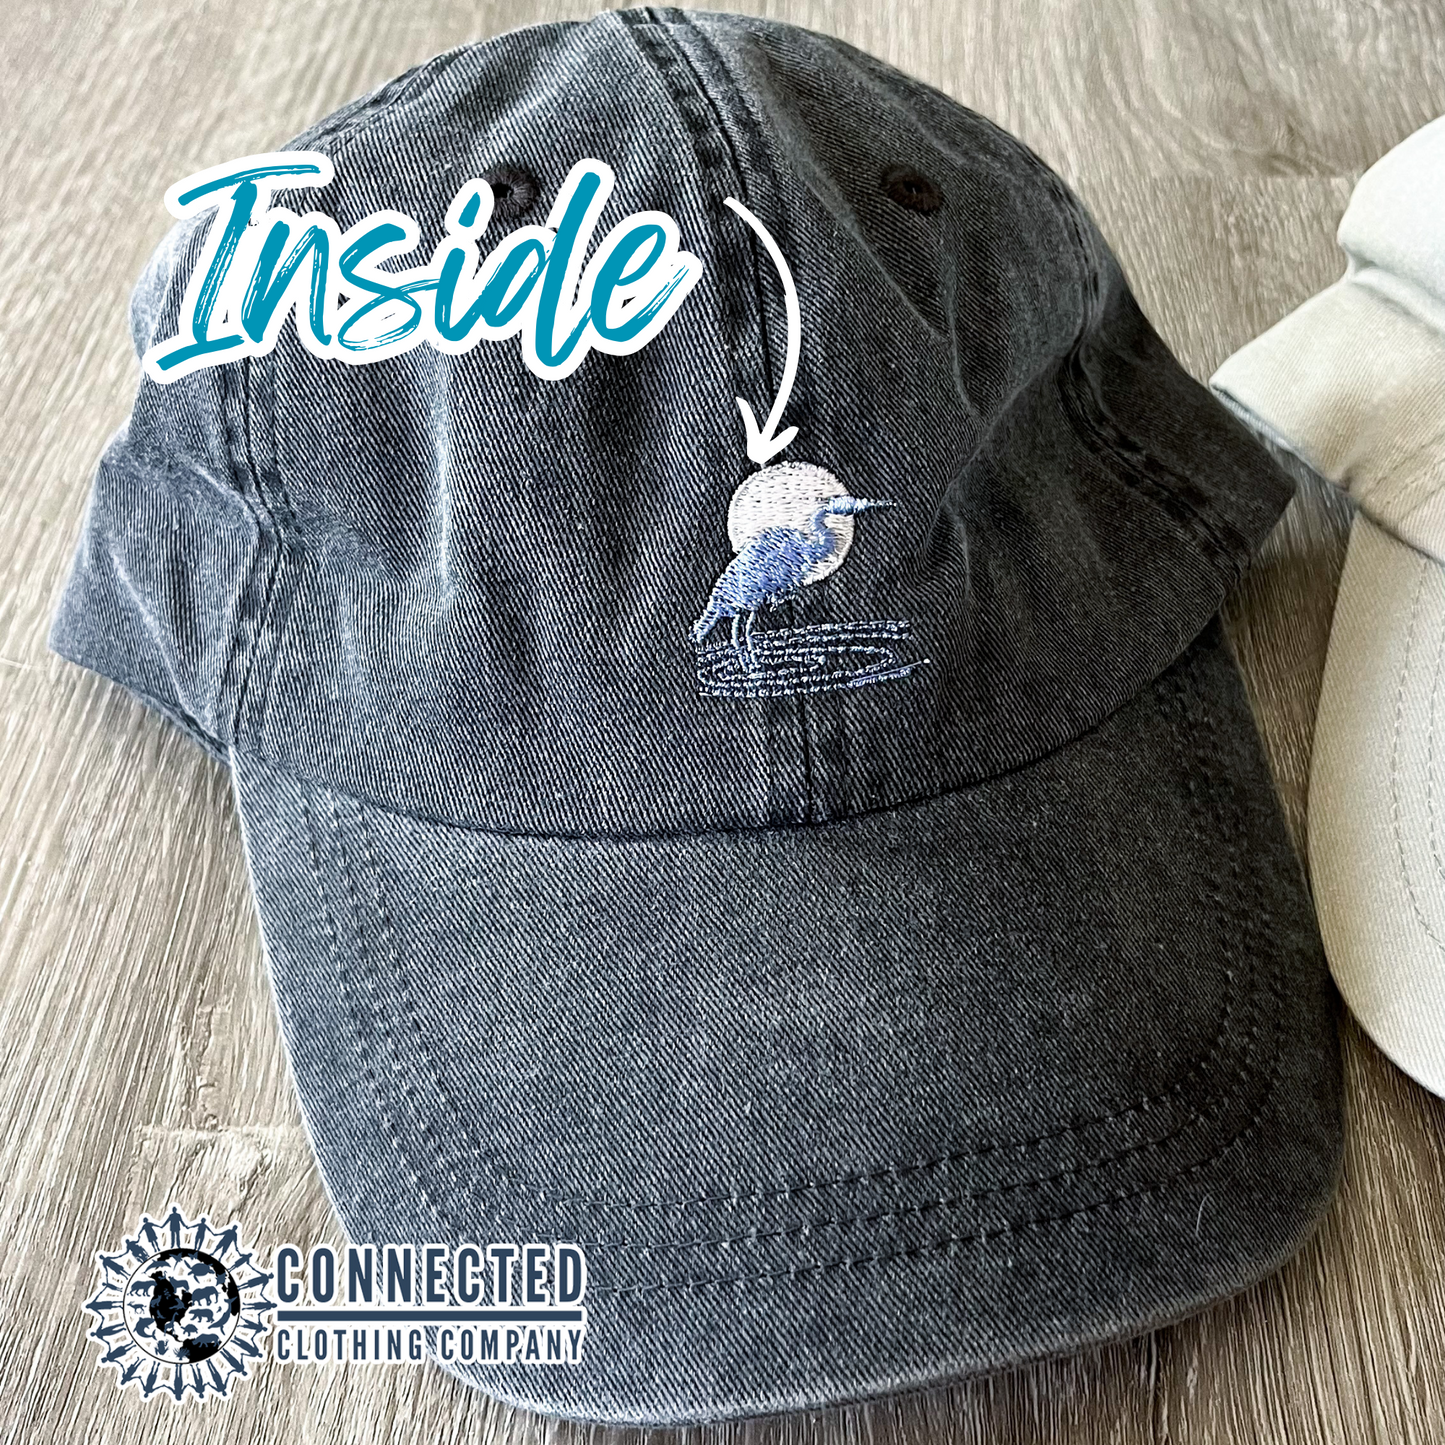 Blue Heron UV Embroidered Hat - Connected Clothing Company - 10% of proceeds donated to ocean conservation